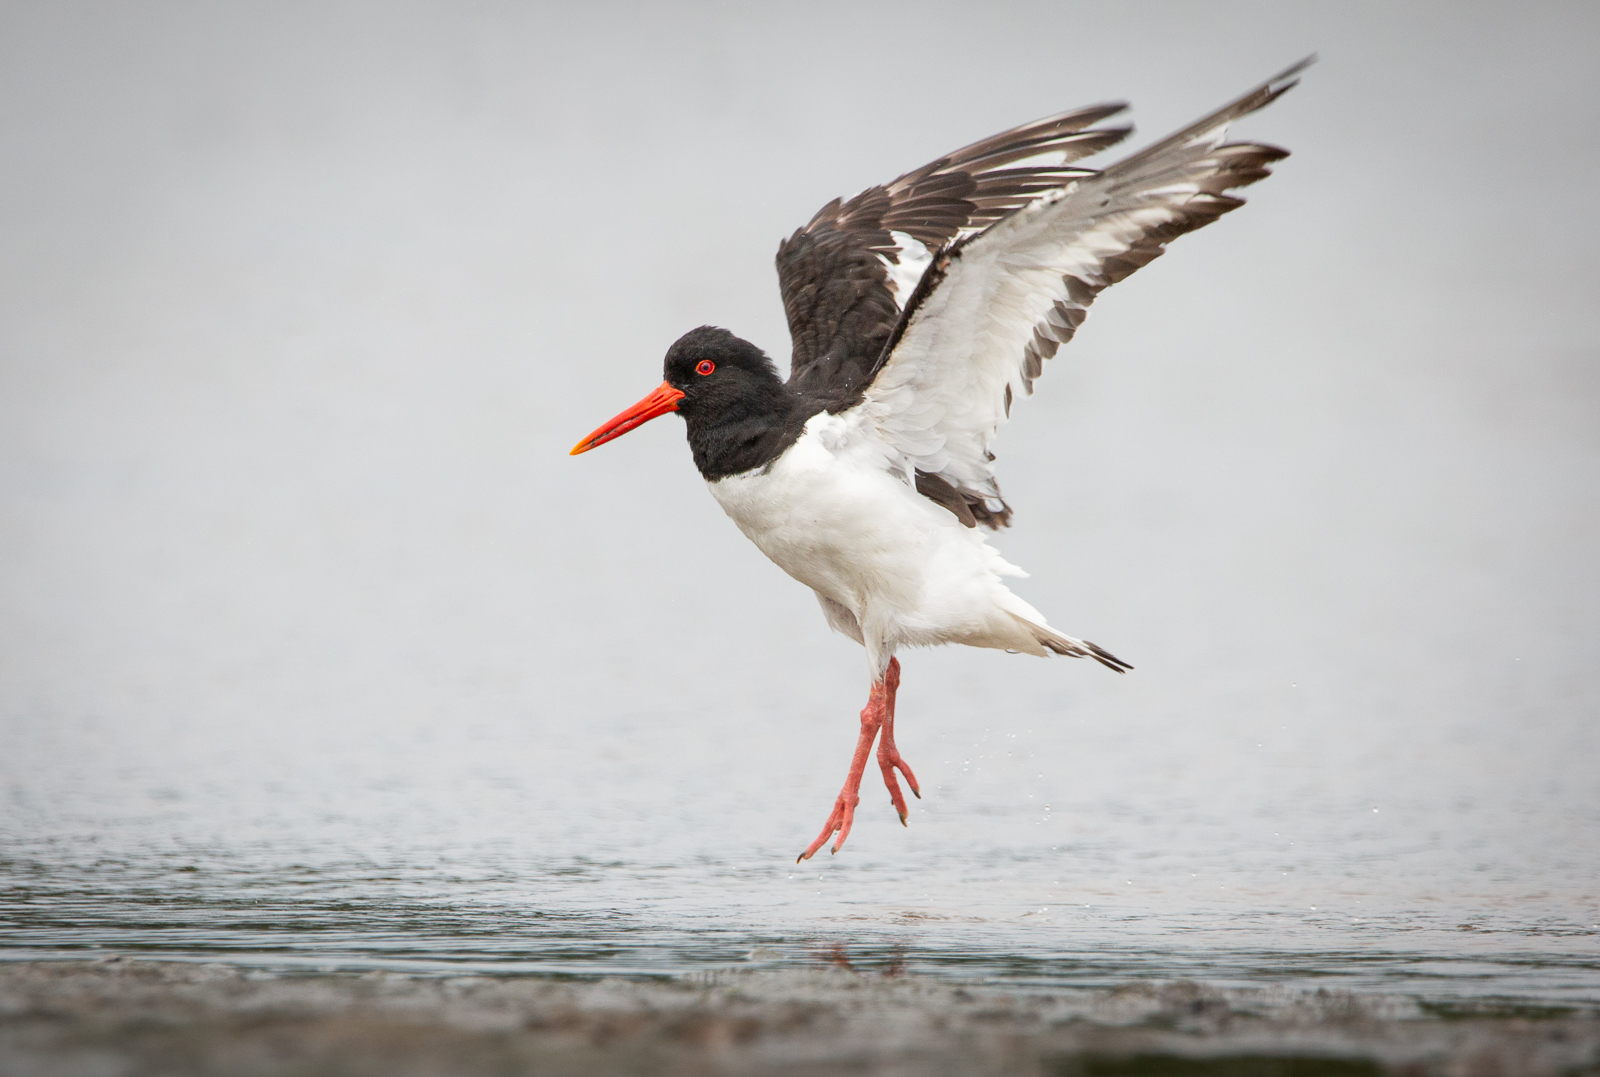 Dance of the oystercatcher 209 C2